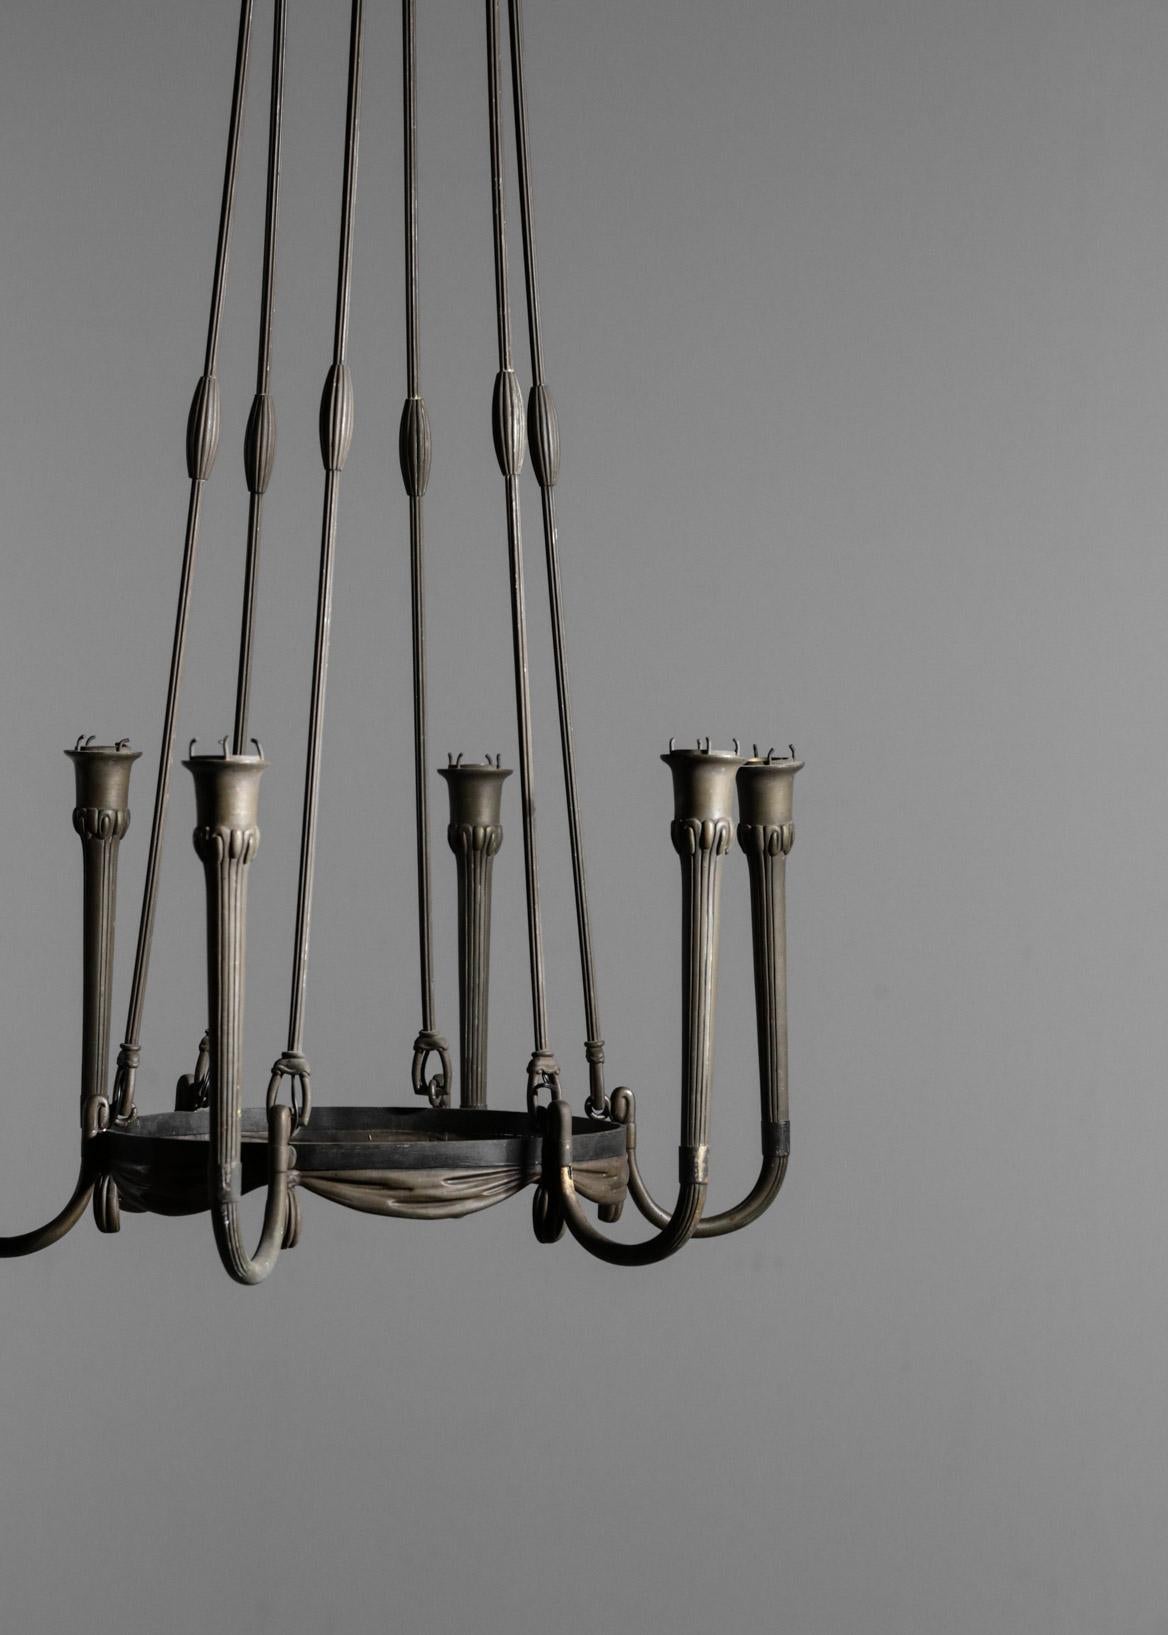 Rare chandelier in bronze from 1930s.
Entirely rewired.
B22 bulb
Great patina.